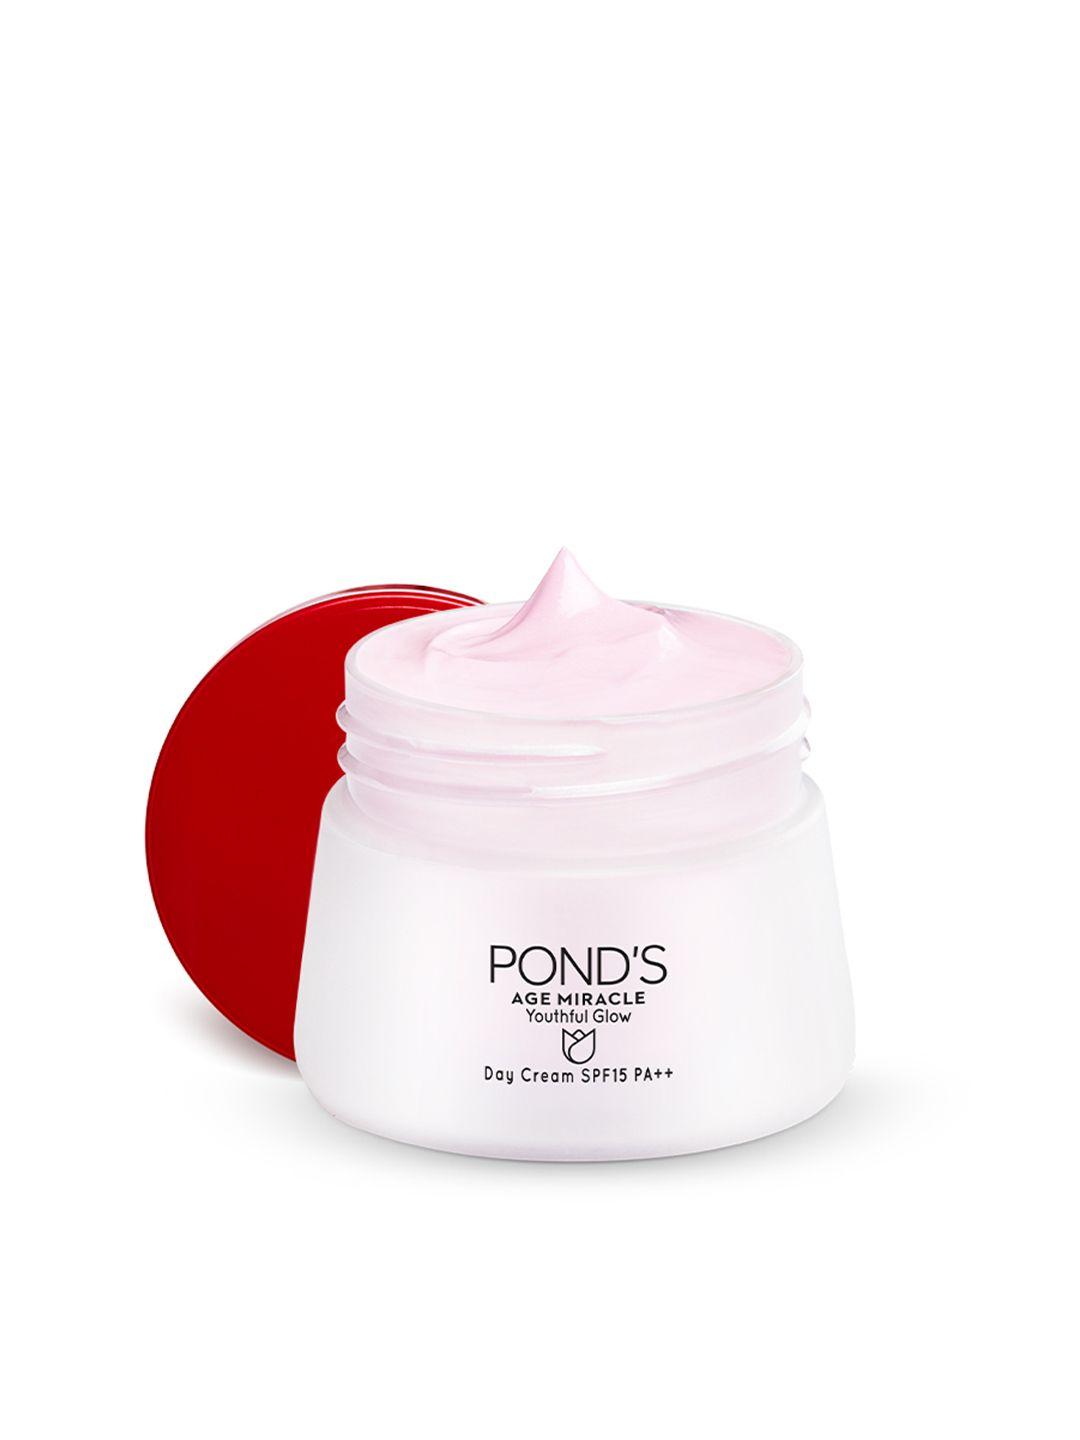 pond's age miracle wrinkle corrector spf 18 pa++ day cream 10 gm